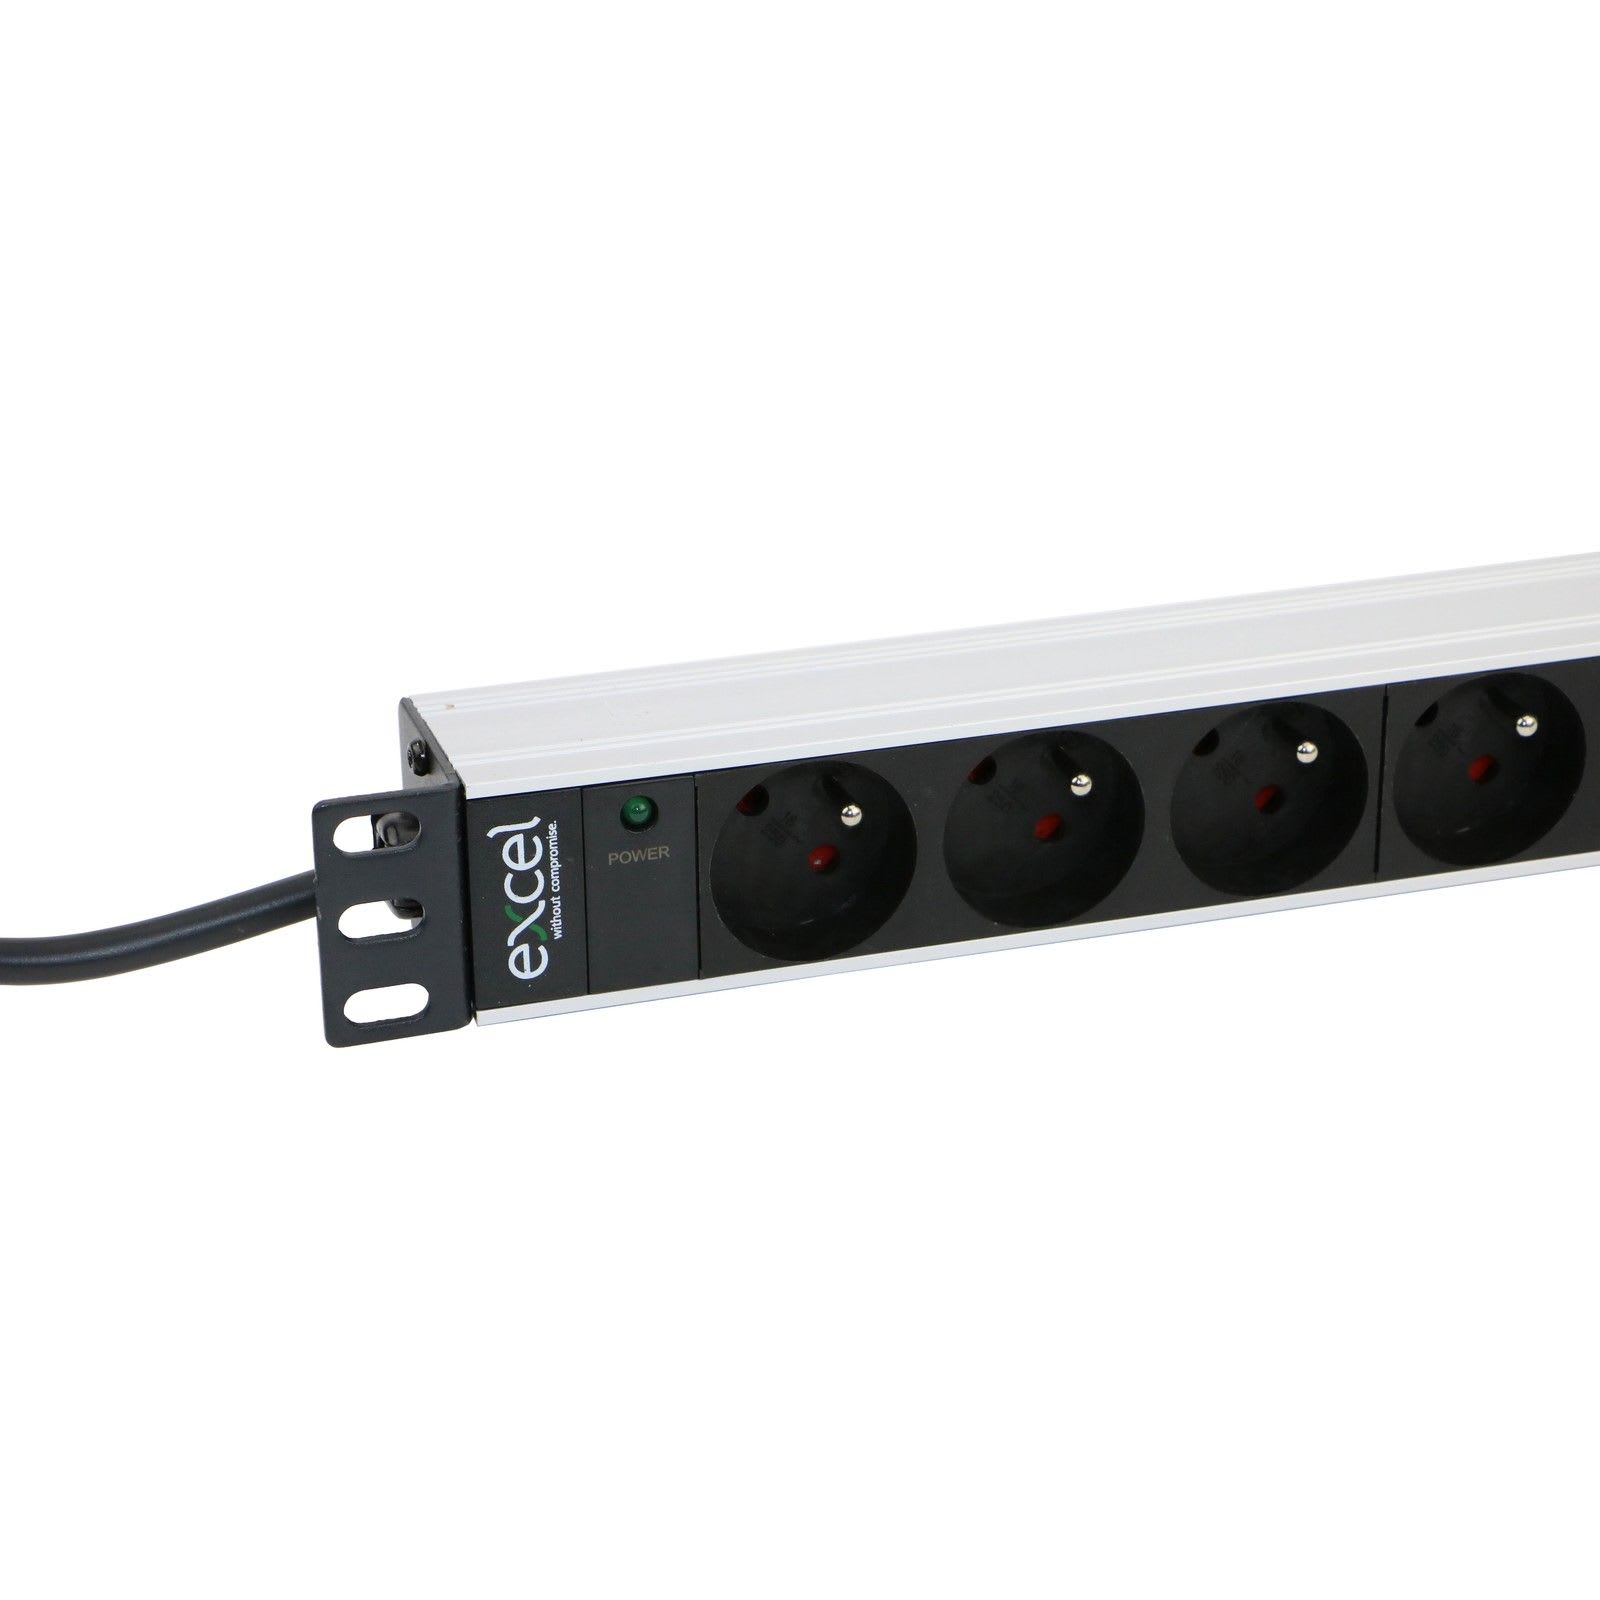 Excel Networking Solutions - 8-way PDU c/w 8xNFC sockets, 16-Amp plug, Unswitched, w/ LED indicator